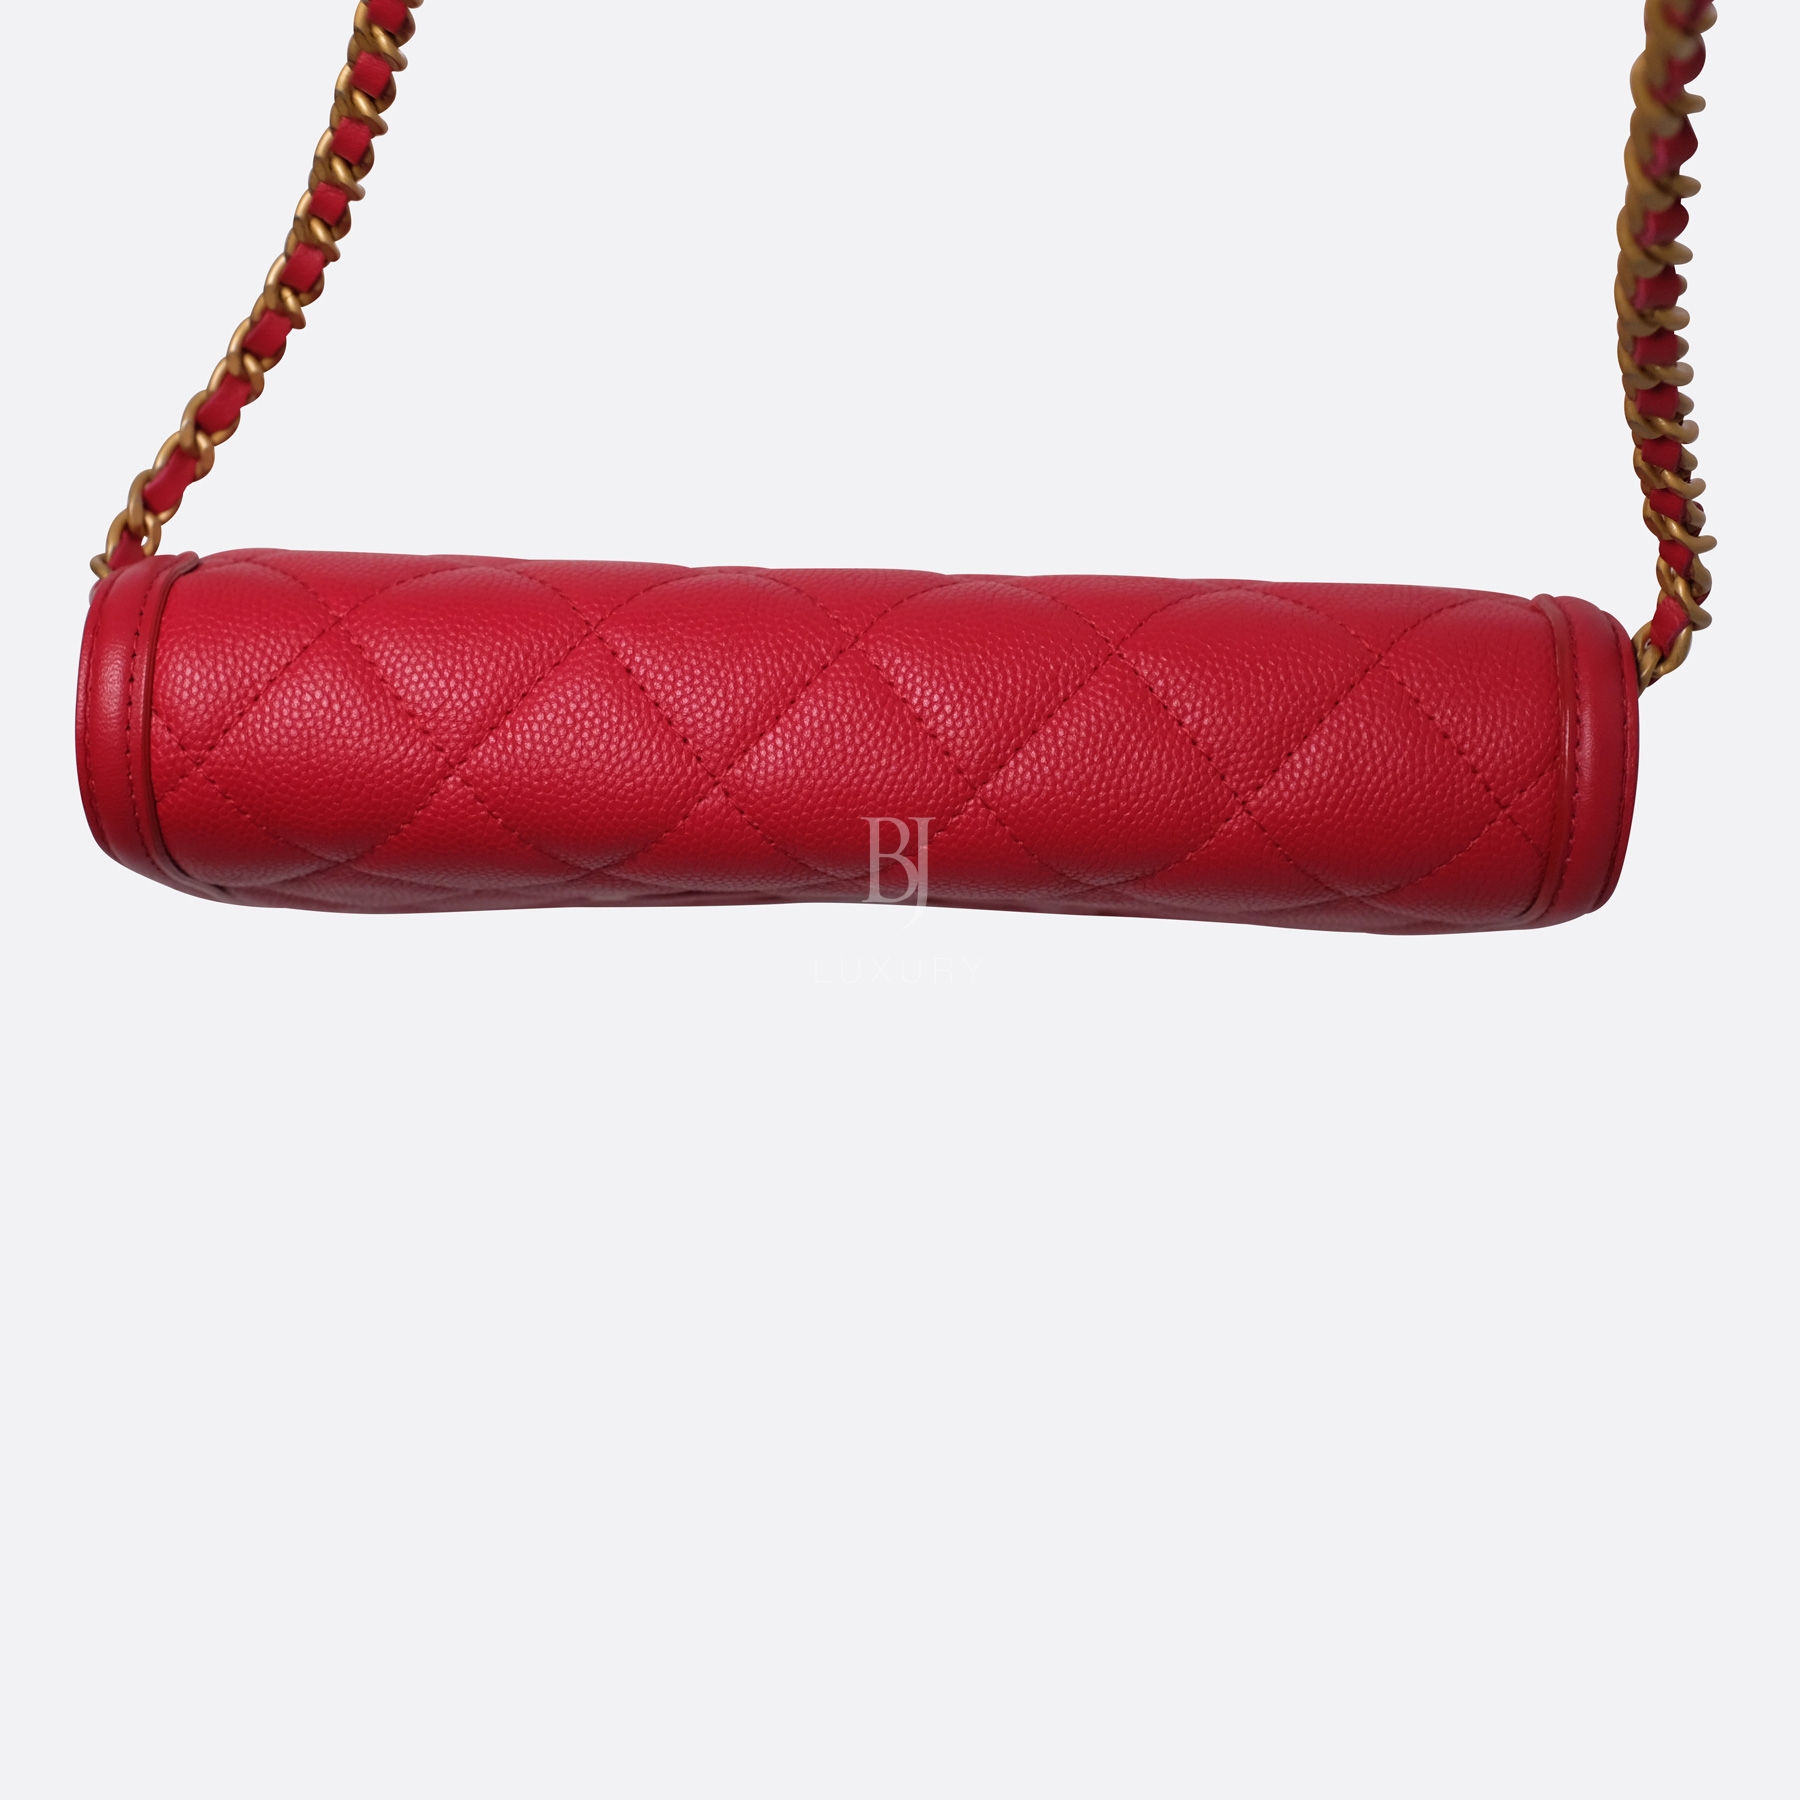 Chanel Wallet On Chain Red Caviar Brushed Gold BJ Luxury 16.jpg